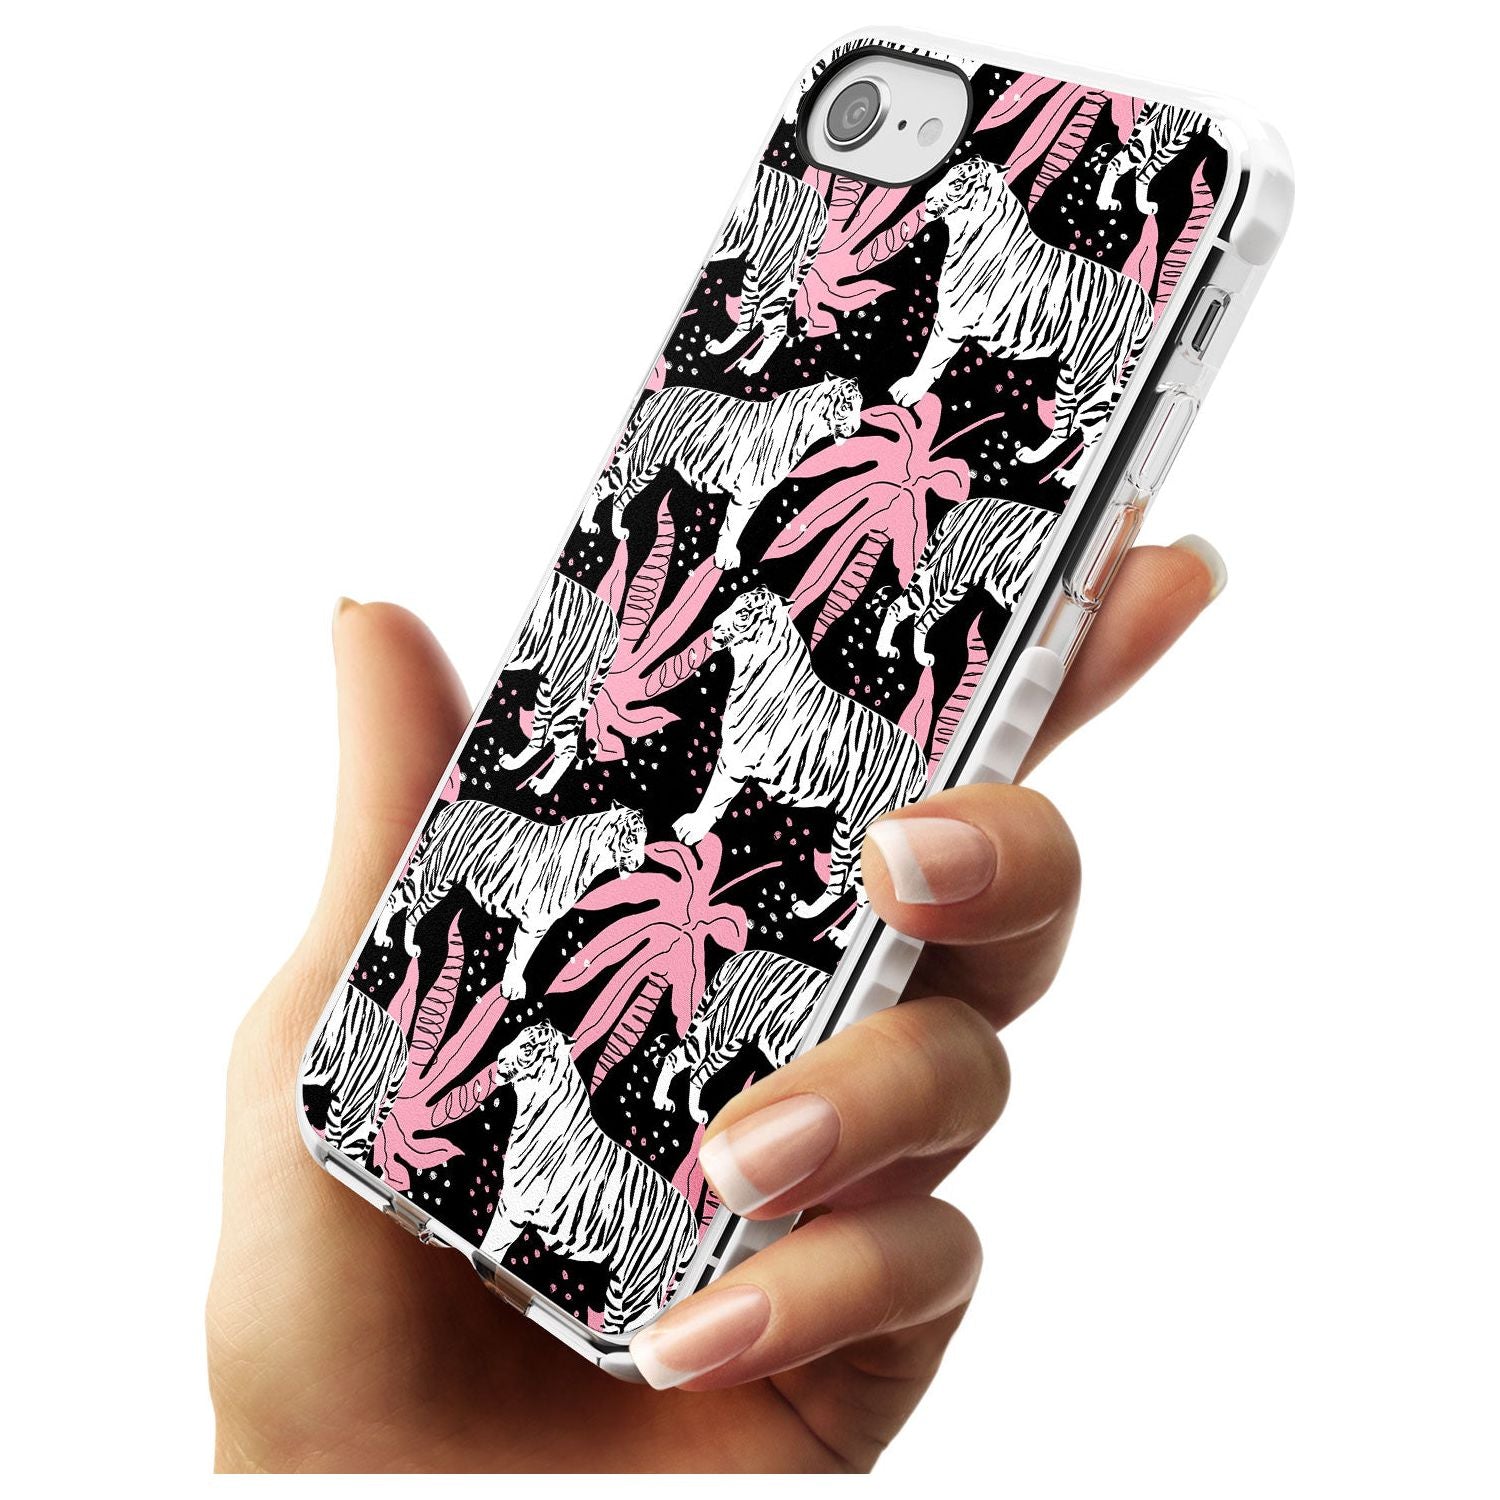 White Tigers on Black Pattern Impact Phone Case for iPhone SE 8 7 Plus